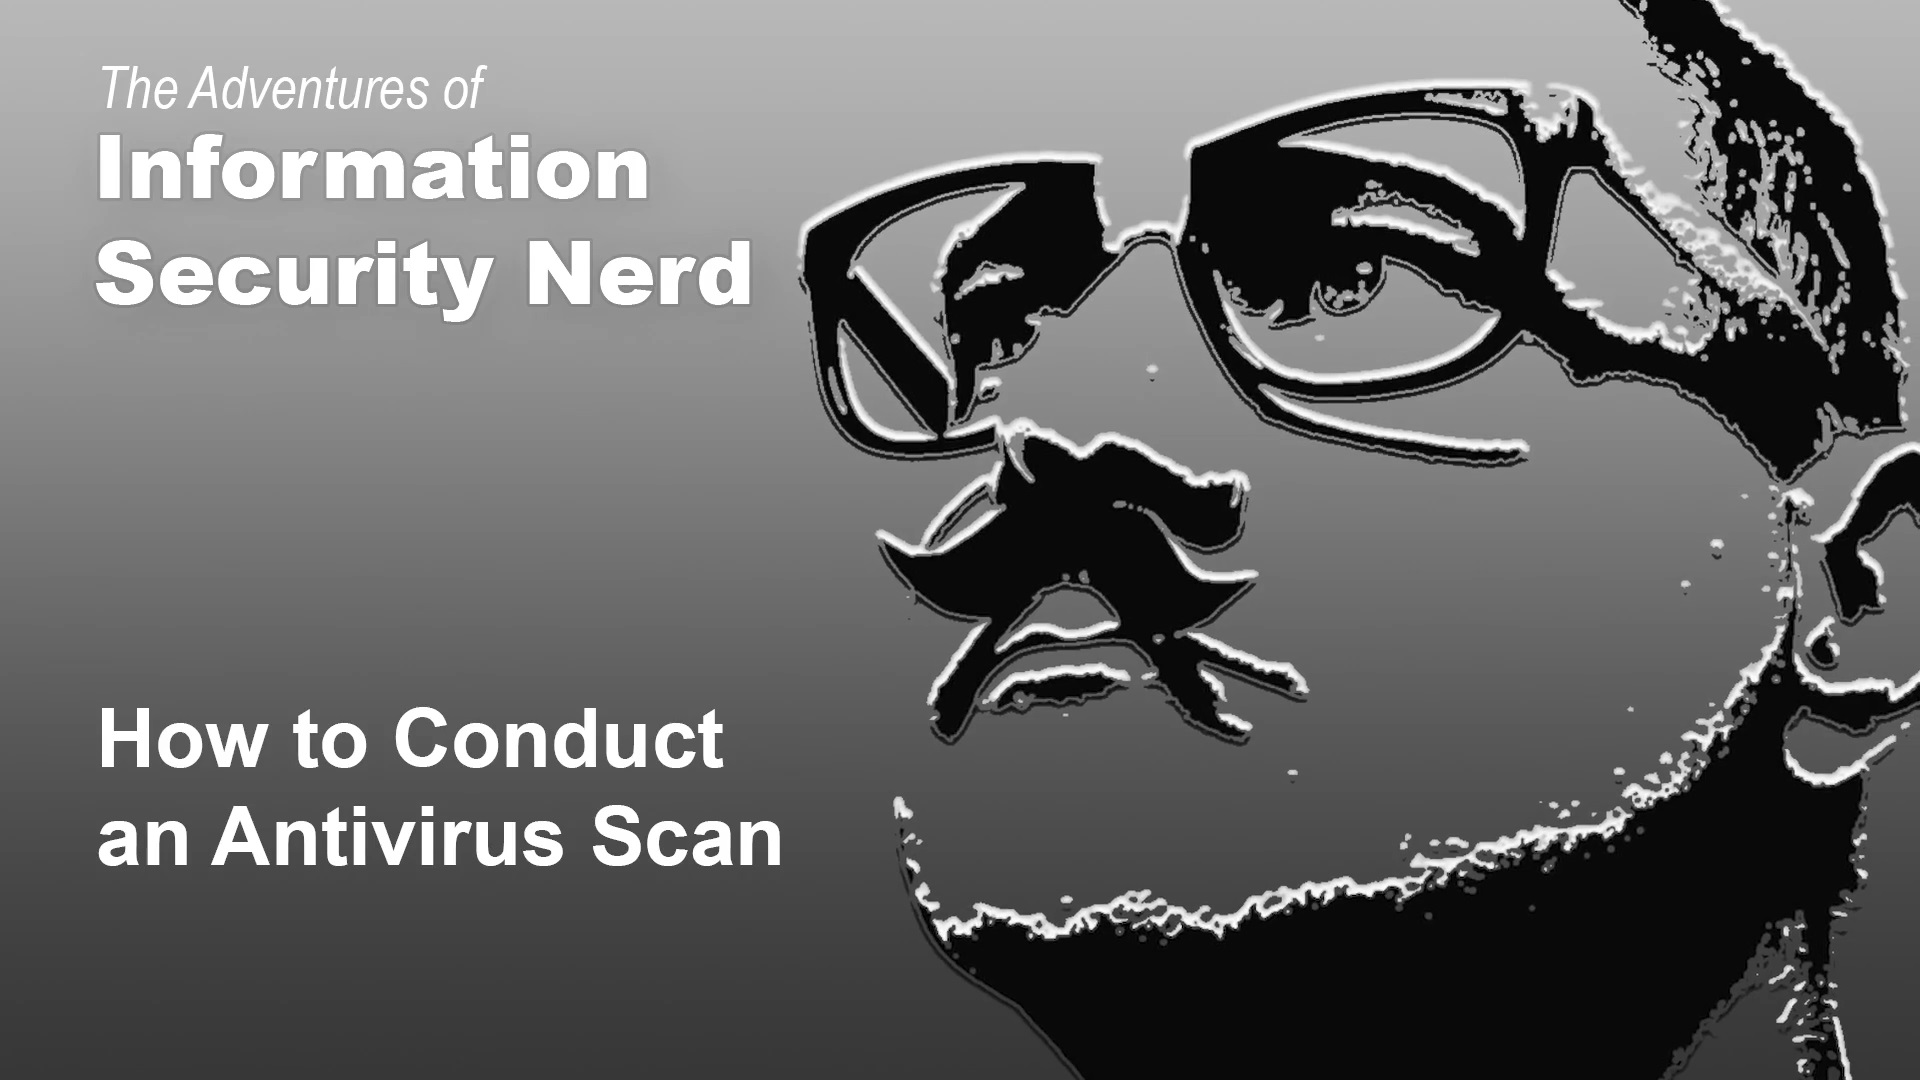 the adventures of information security nerd - how to conduct an antivirus scan